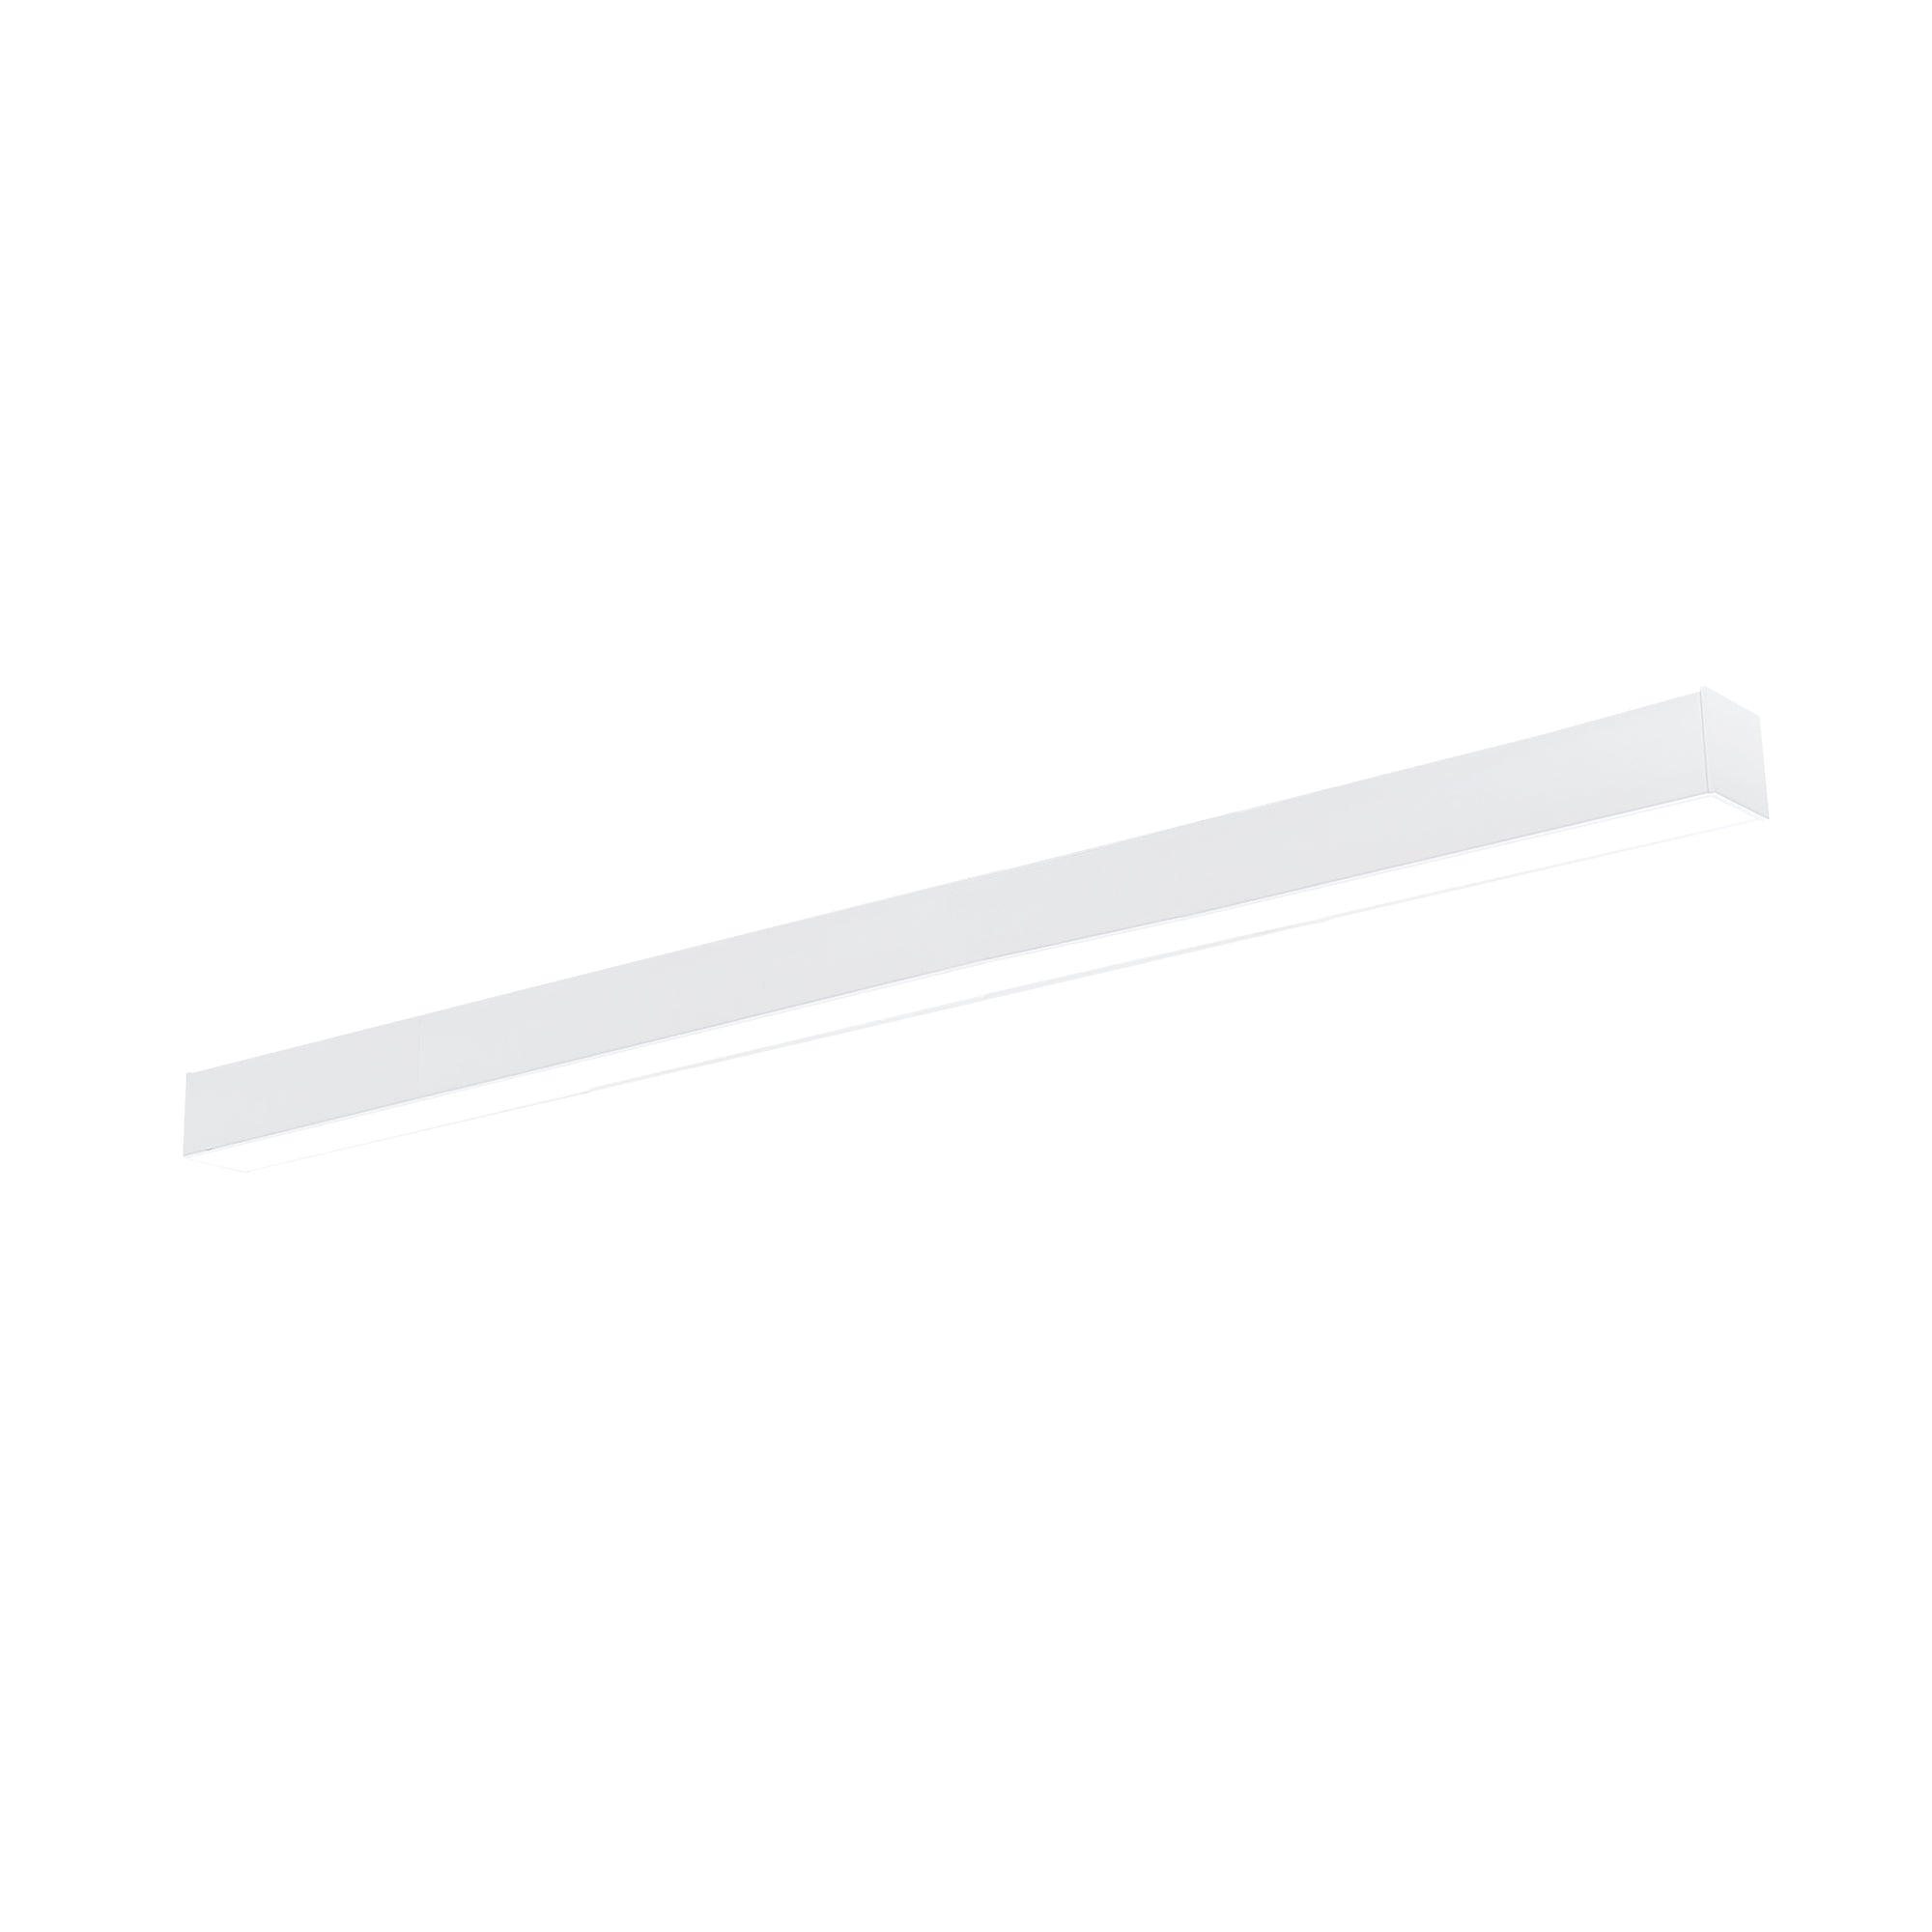 Nora Lighting NLINSW-8334W - Linear - 8' L-Line LED Direct Linear w/ Selectable Wattage & CCT, White Finish